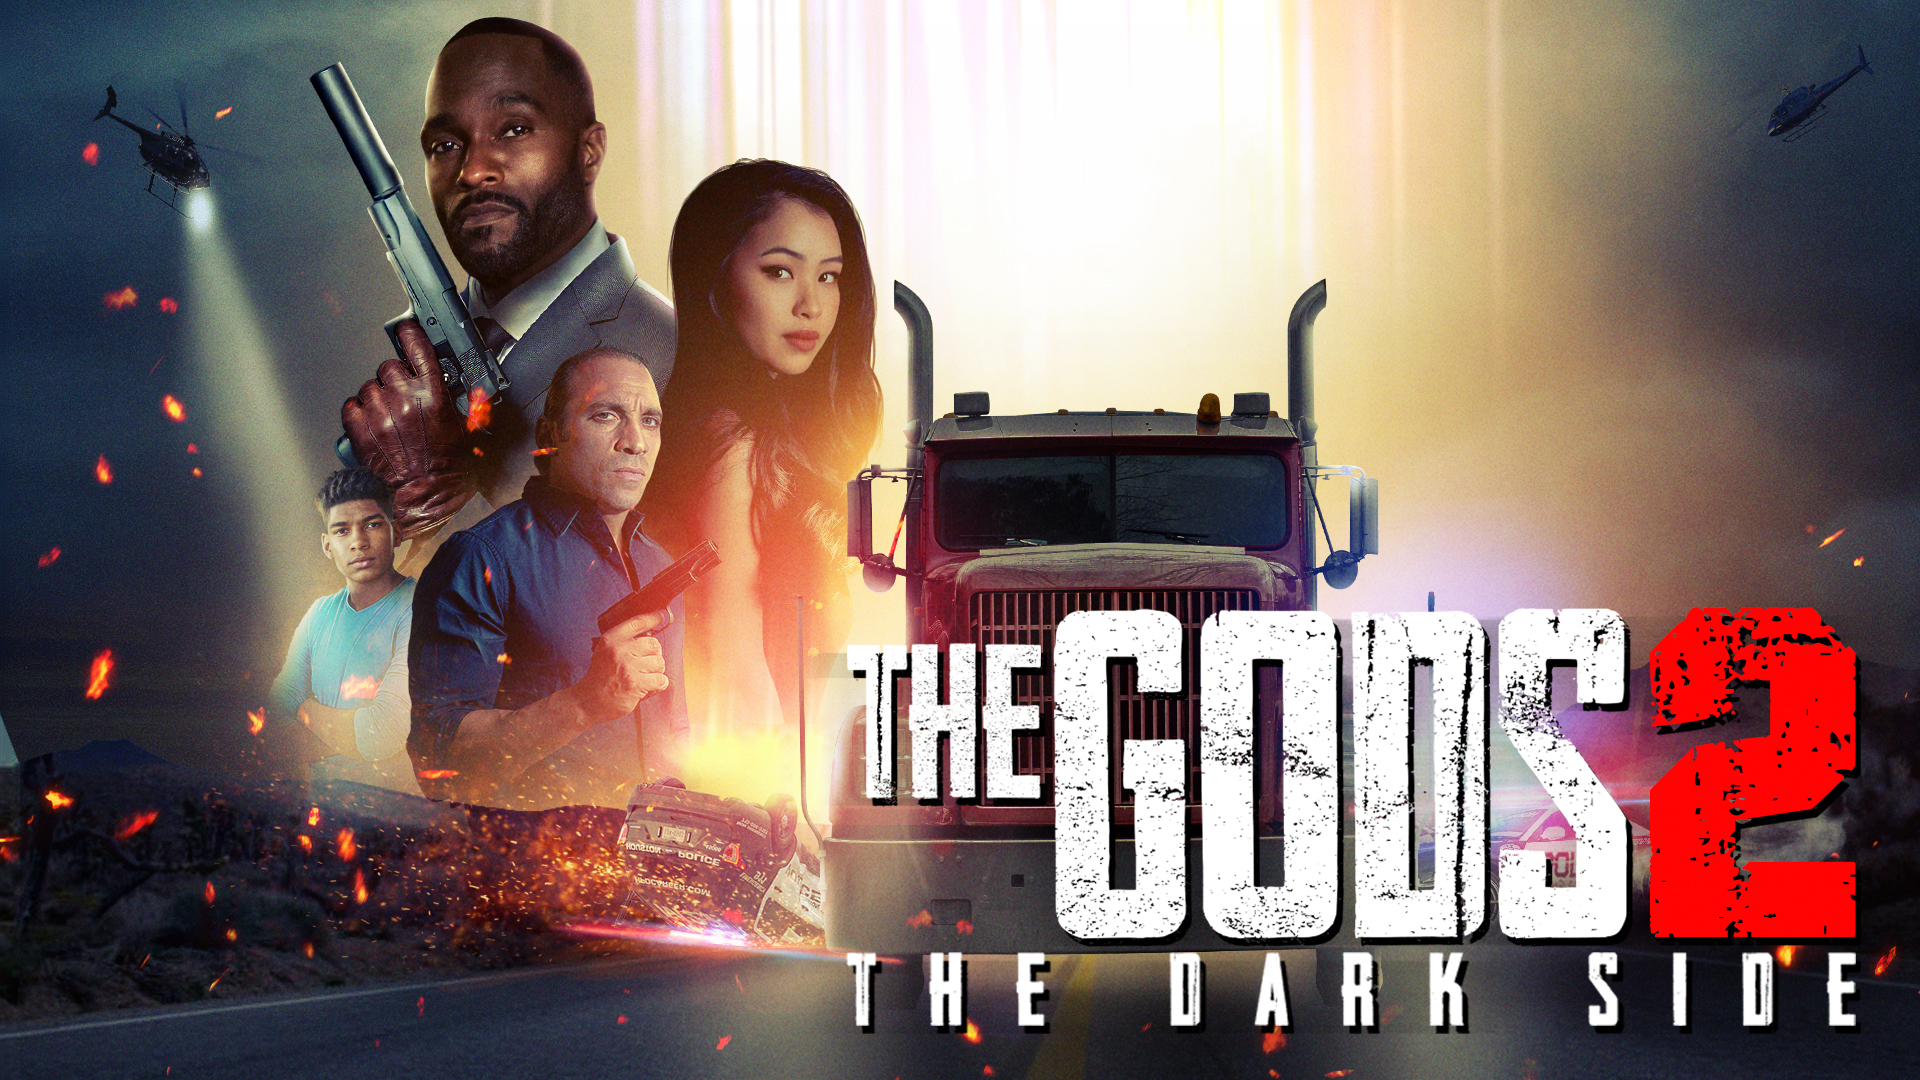 NEW TRAILER FOR THE GODS 2 : THE DARK SIDE WITH MYKEL SHANNON JENKINS